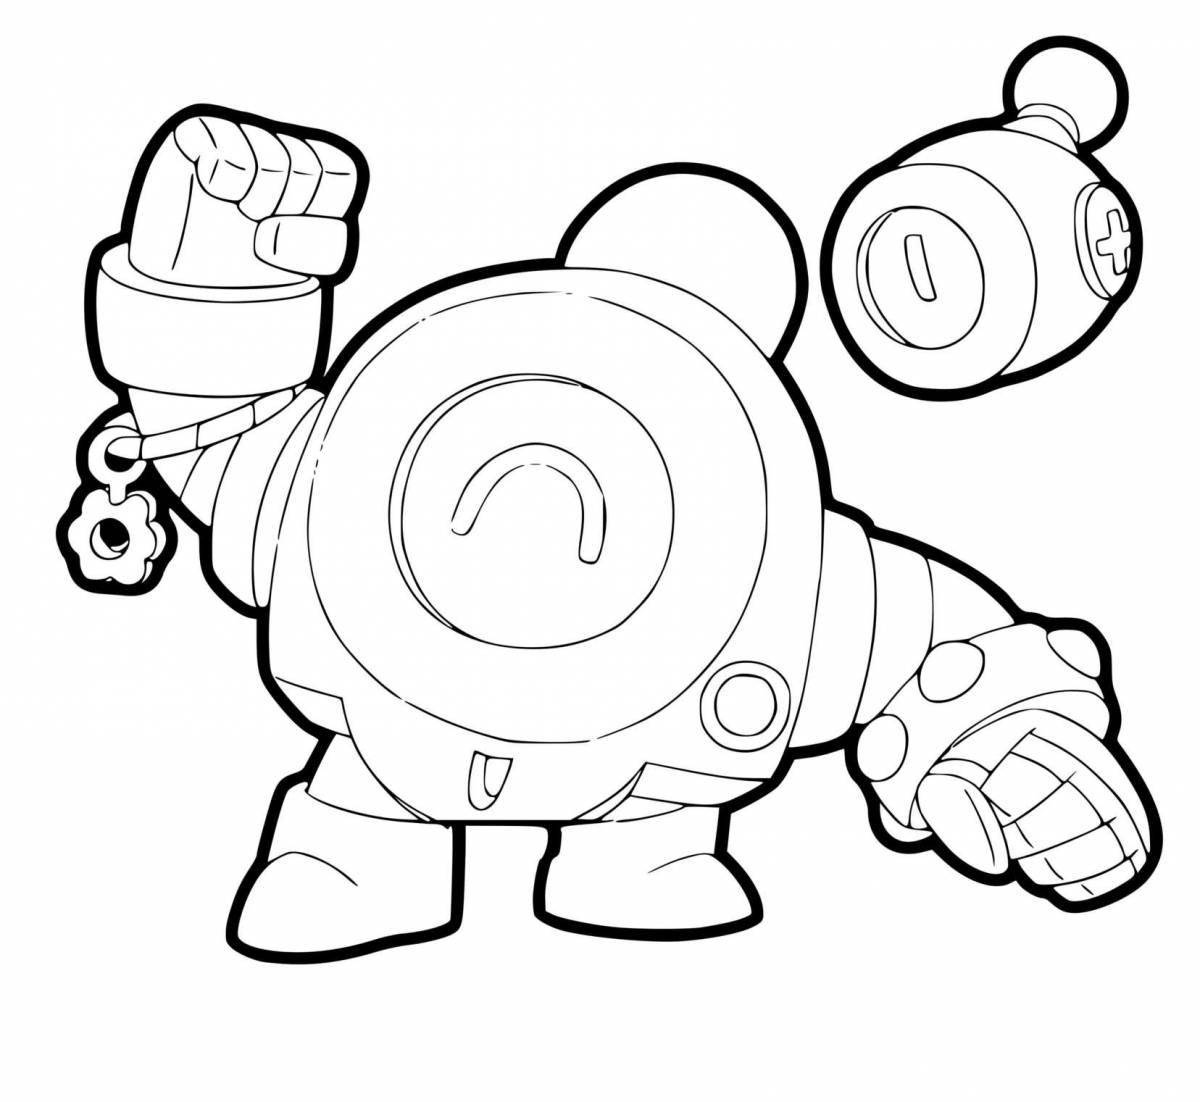 Amazing Fighter Icons Coloring Page